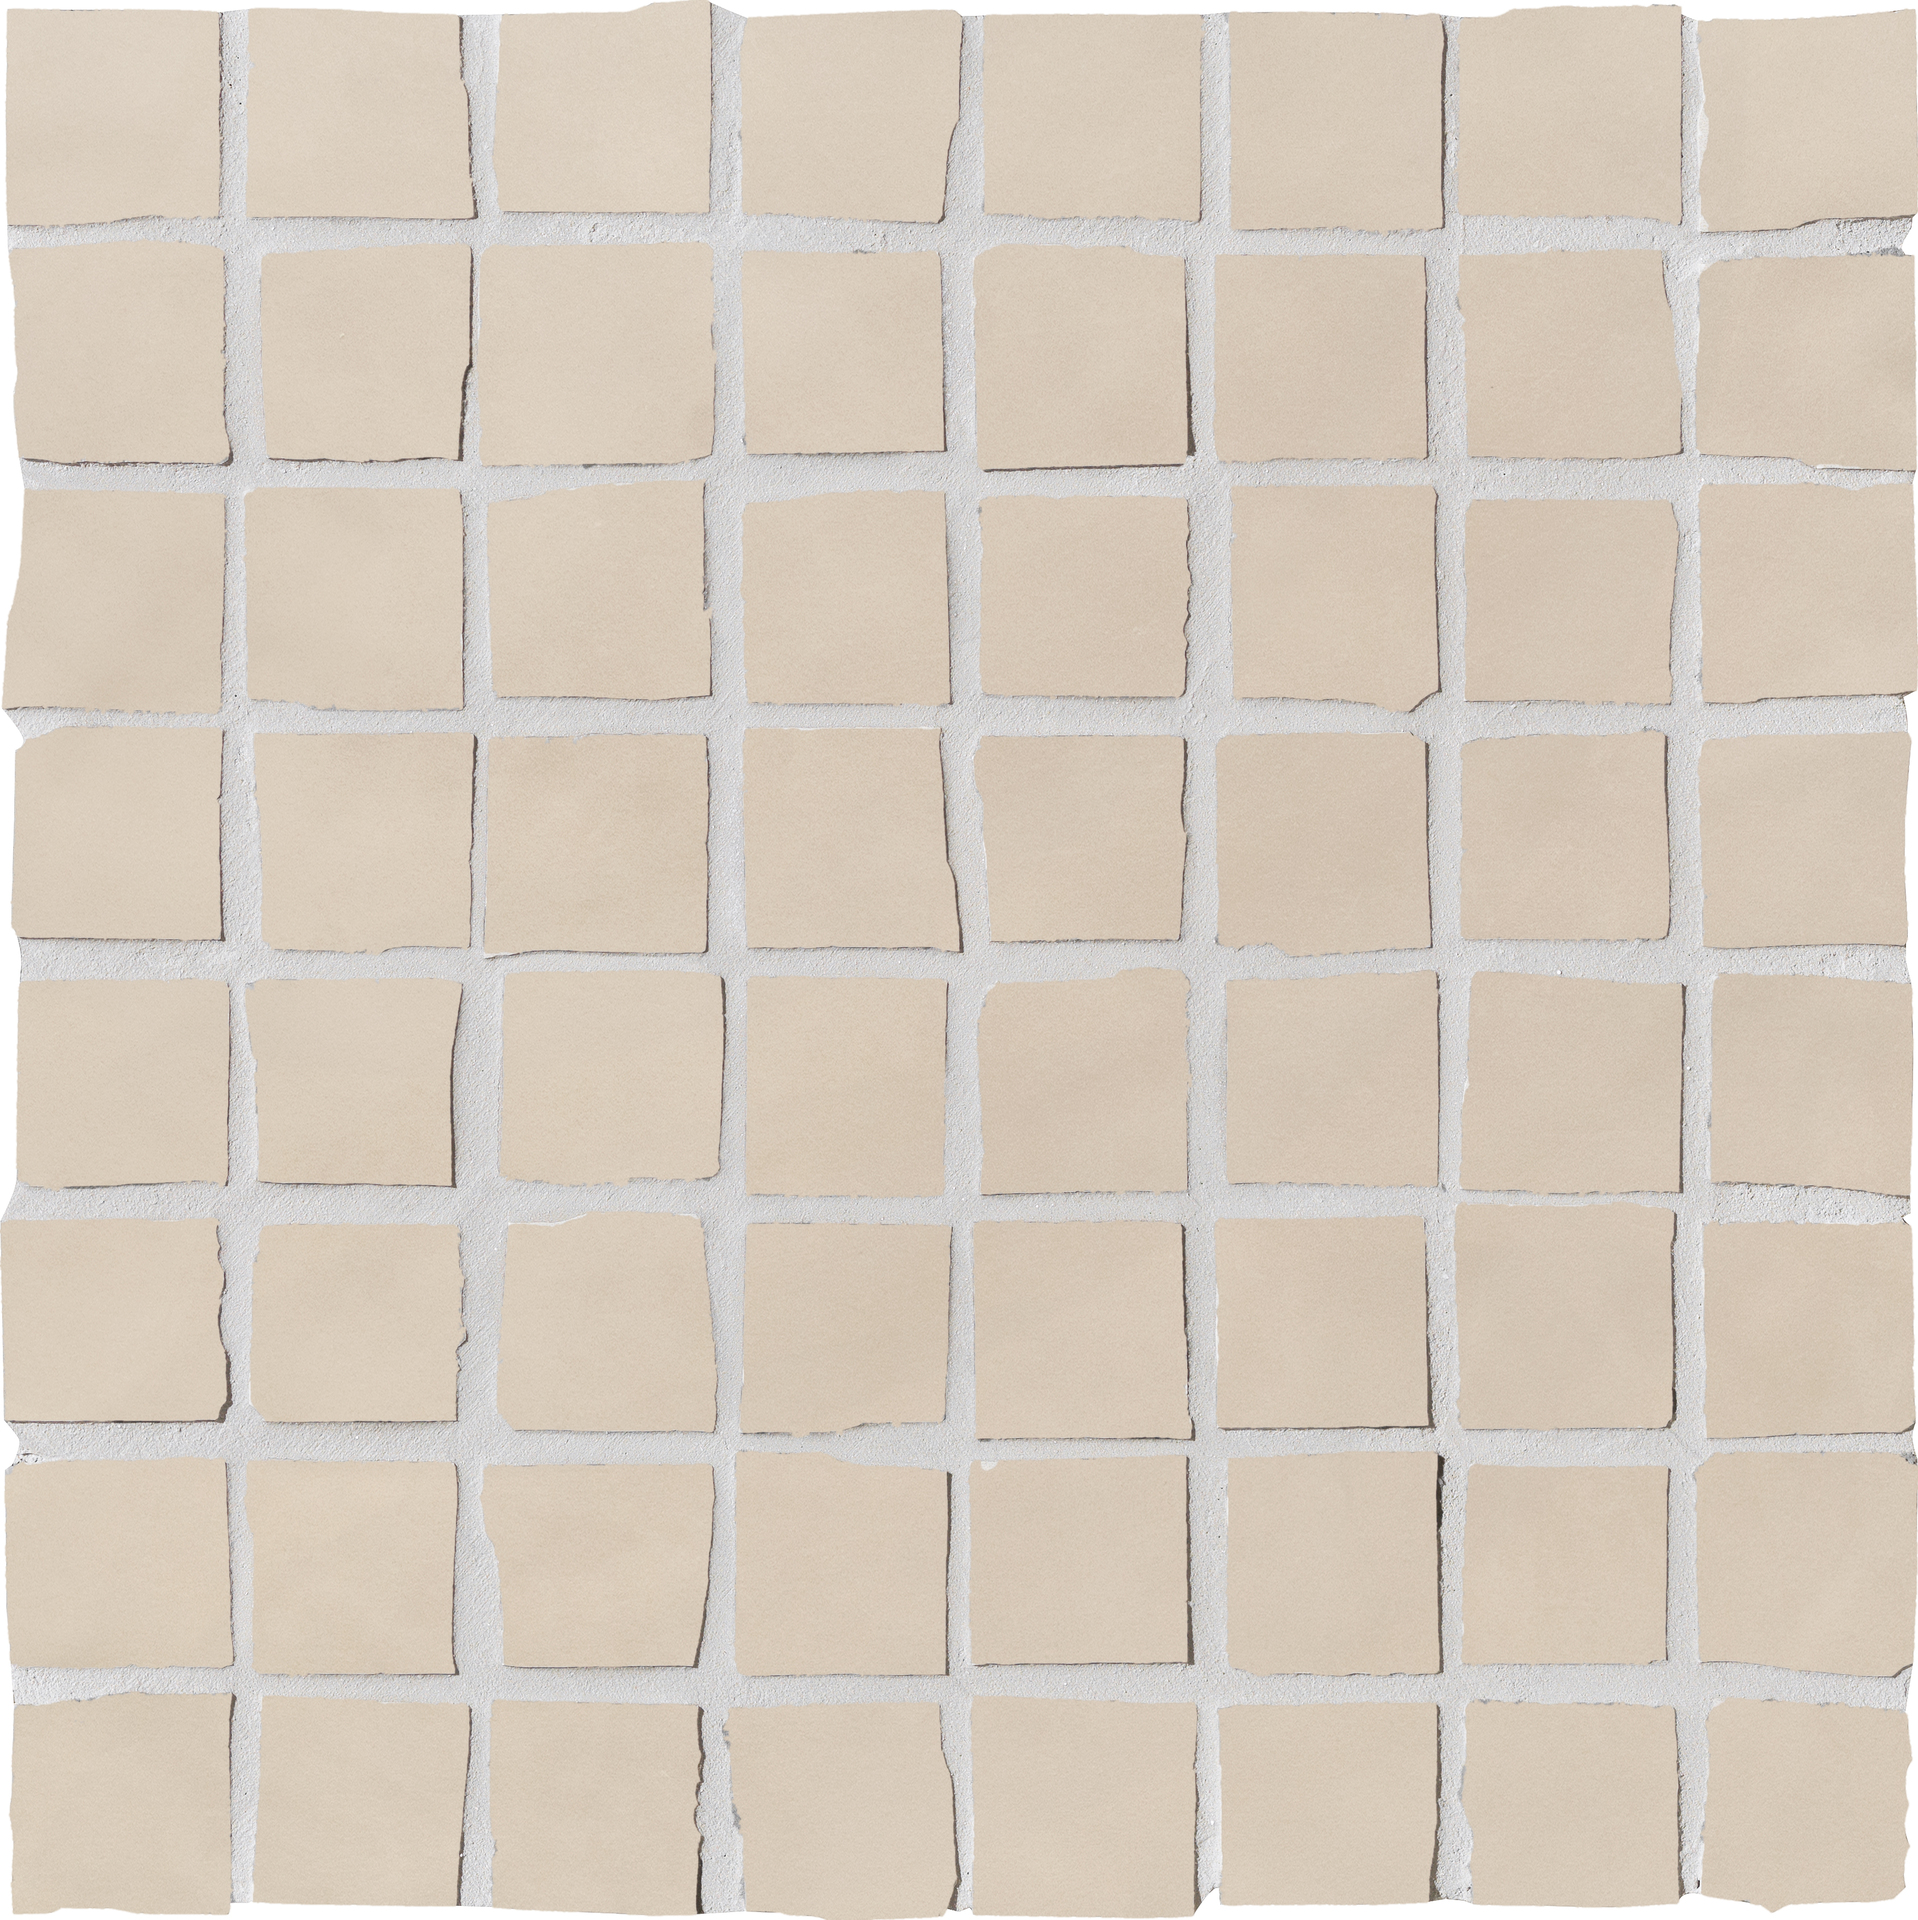 Panaria Even Ivory Naturale Mosaic PBEEV20 20x20cm rectified 10,5mm